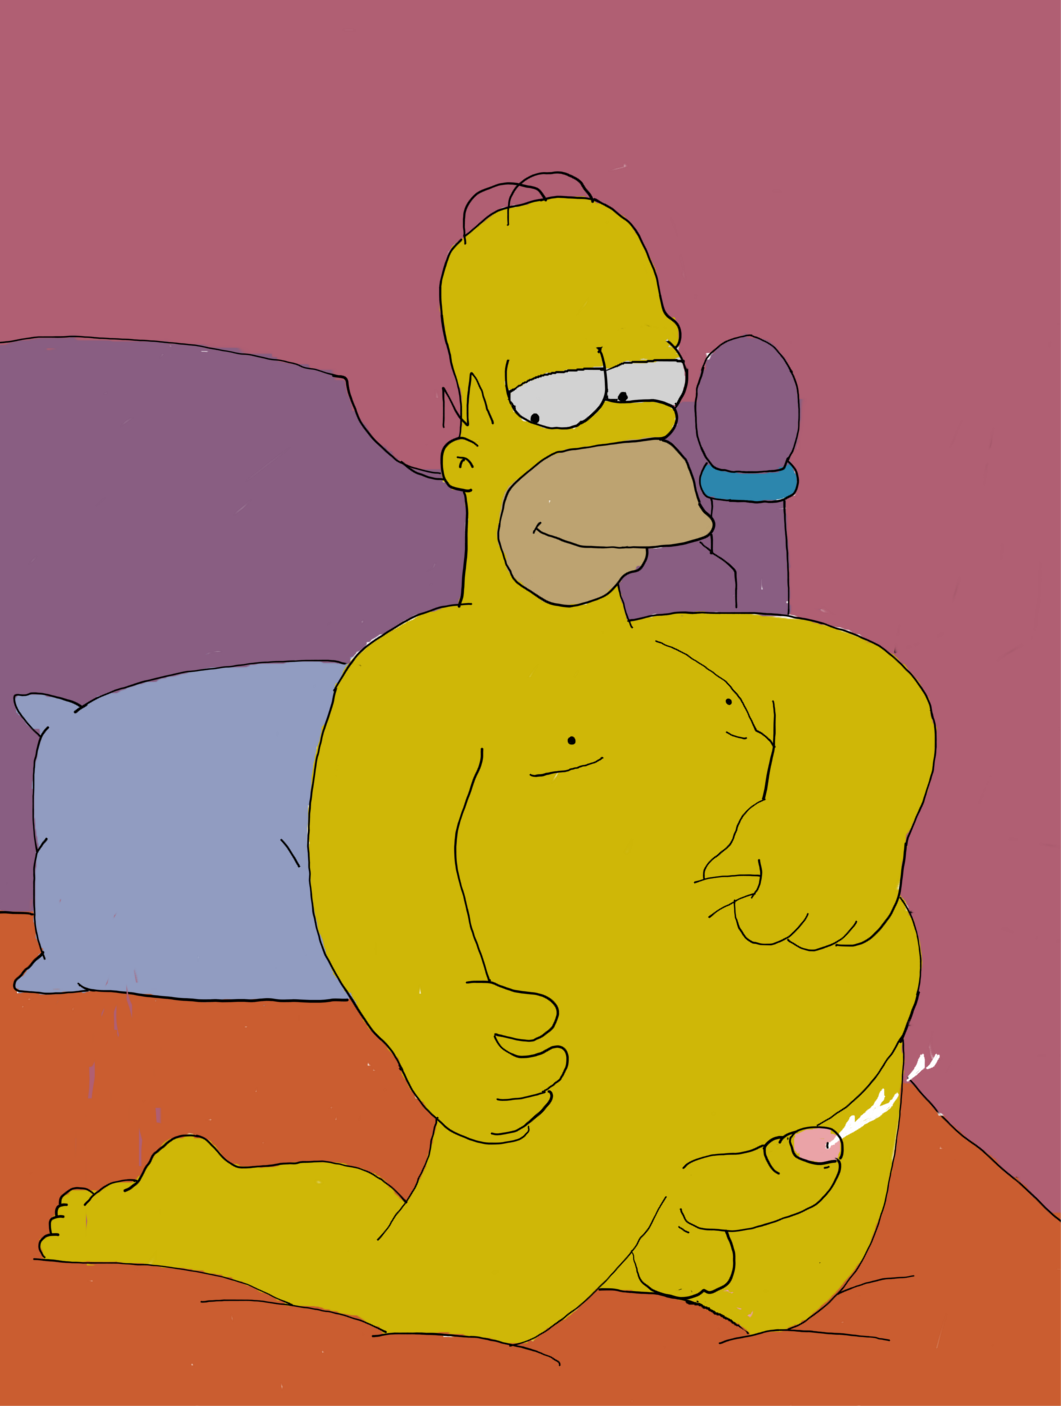 1949674 - Homer_Simpson The_Simpsons.png.